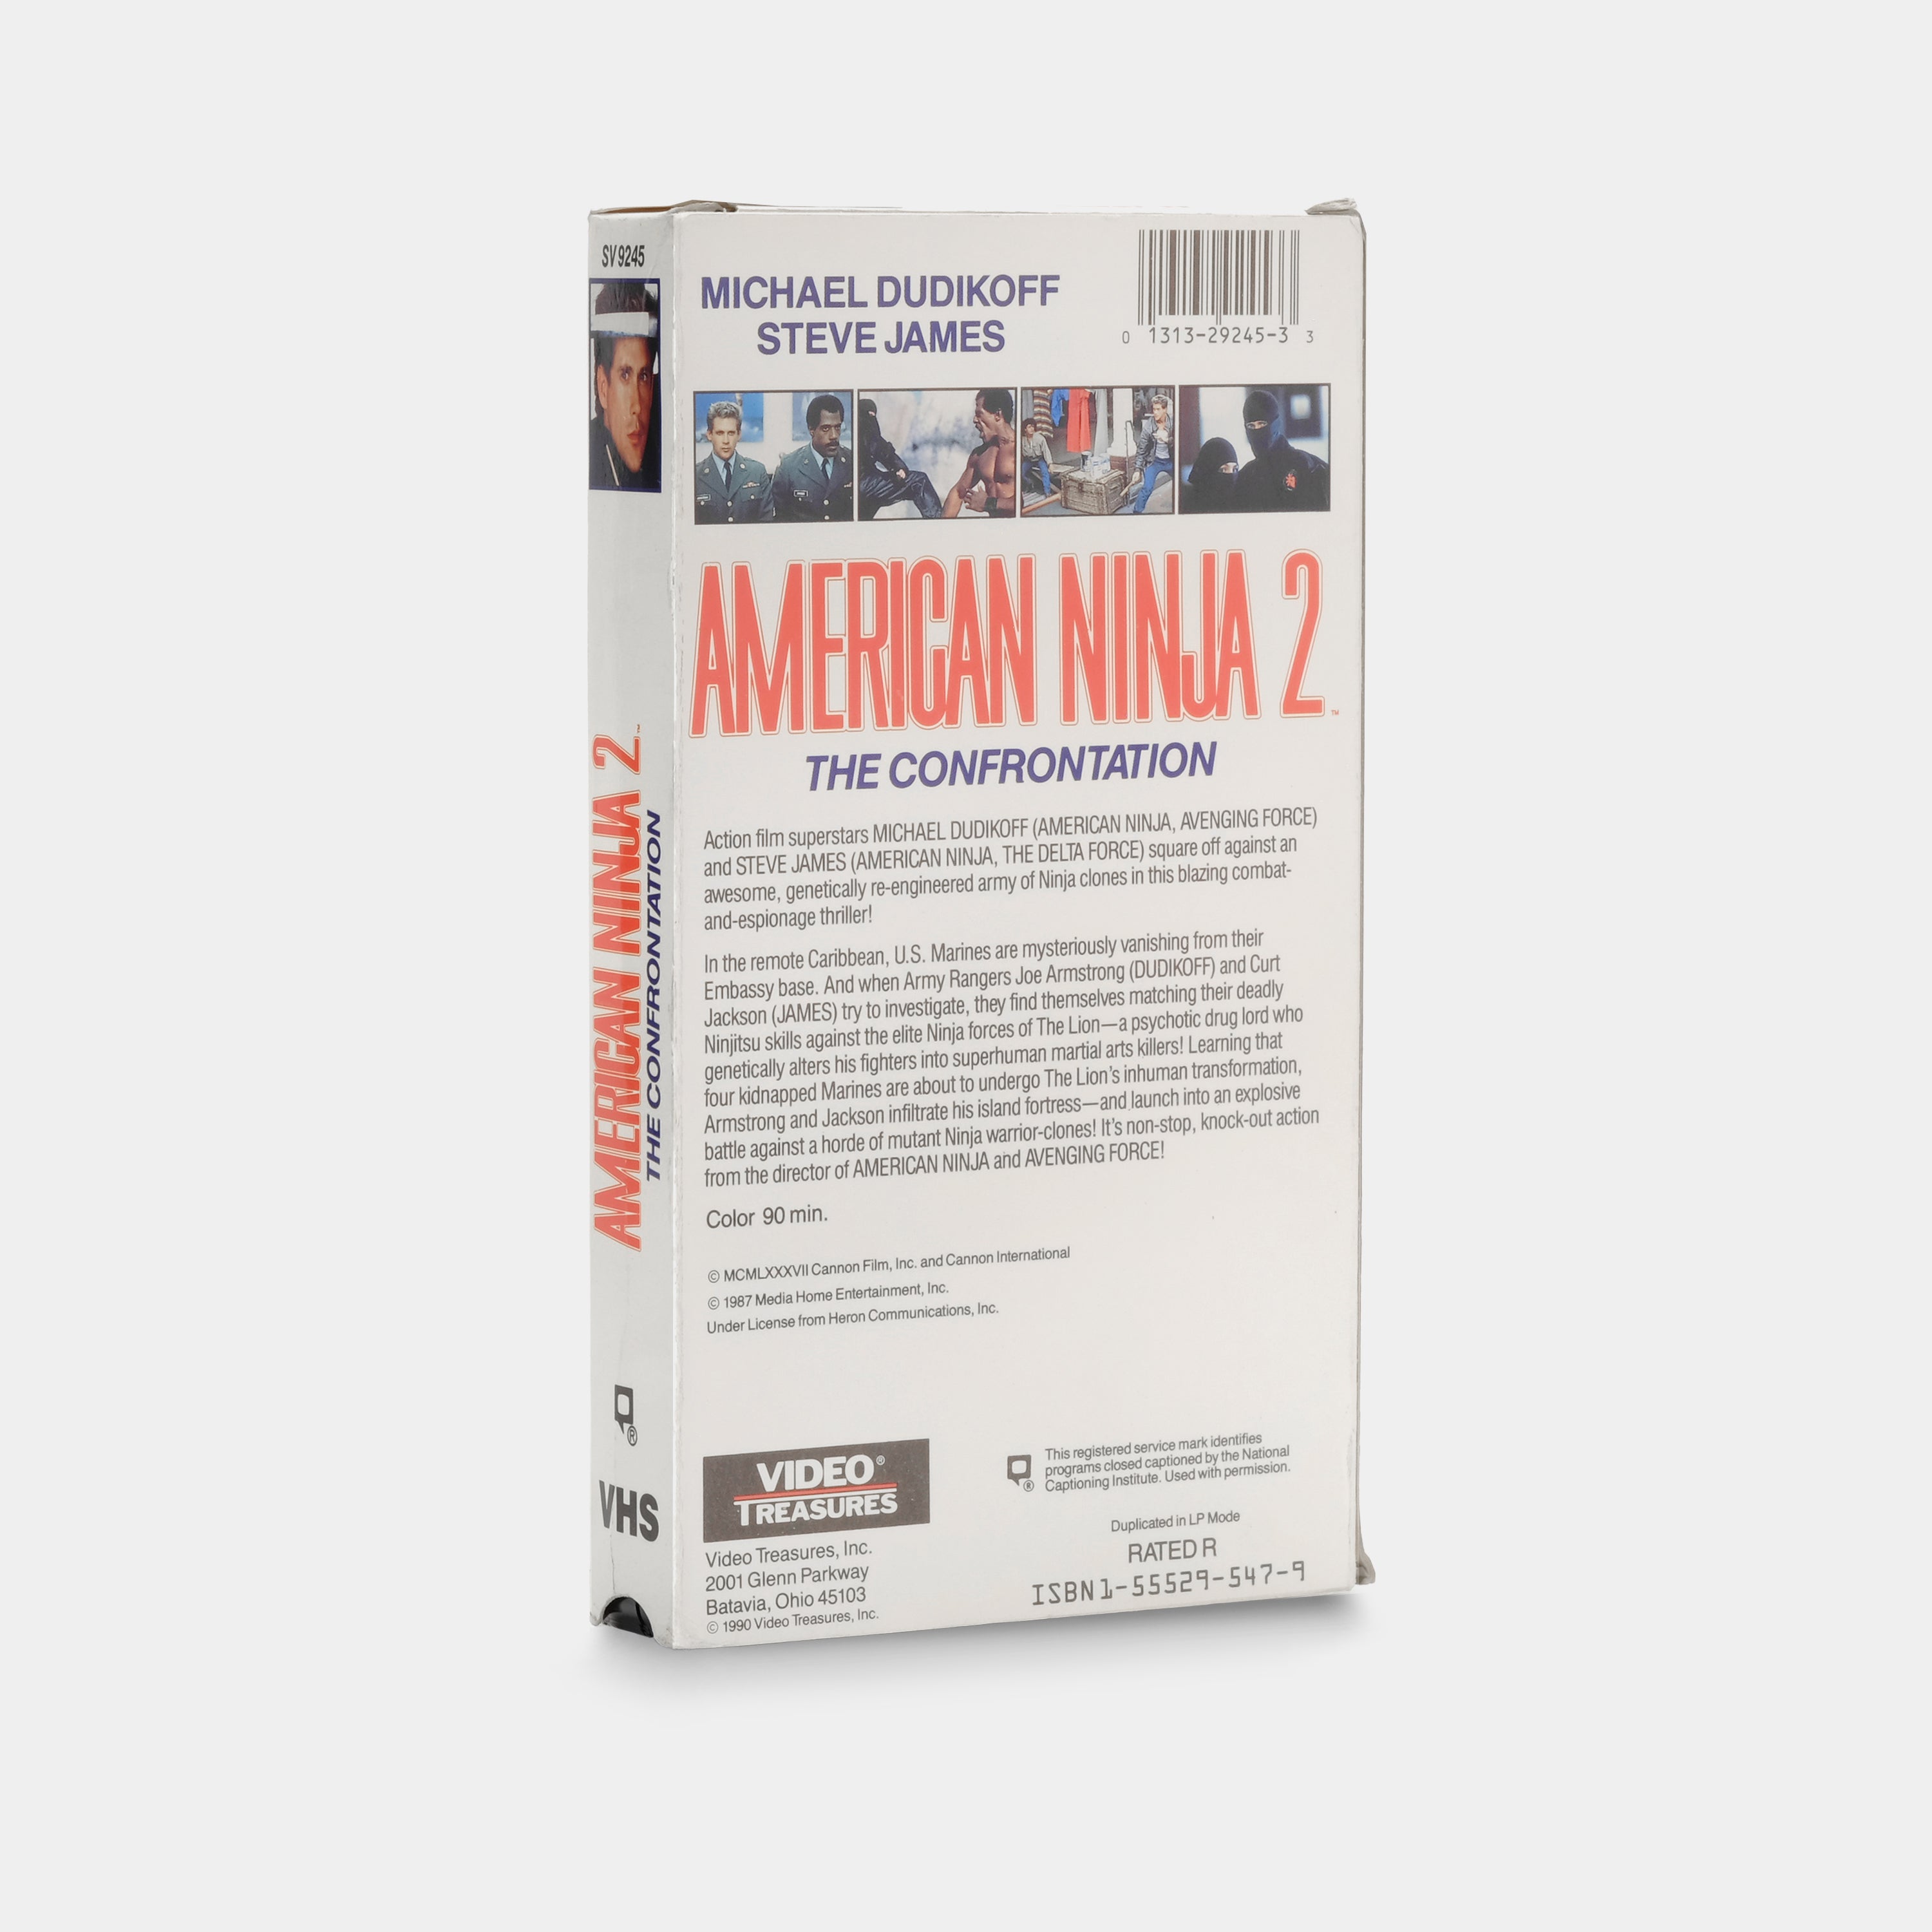 American Ninja 2: The Confrontation VHS Tape